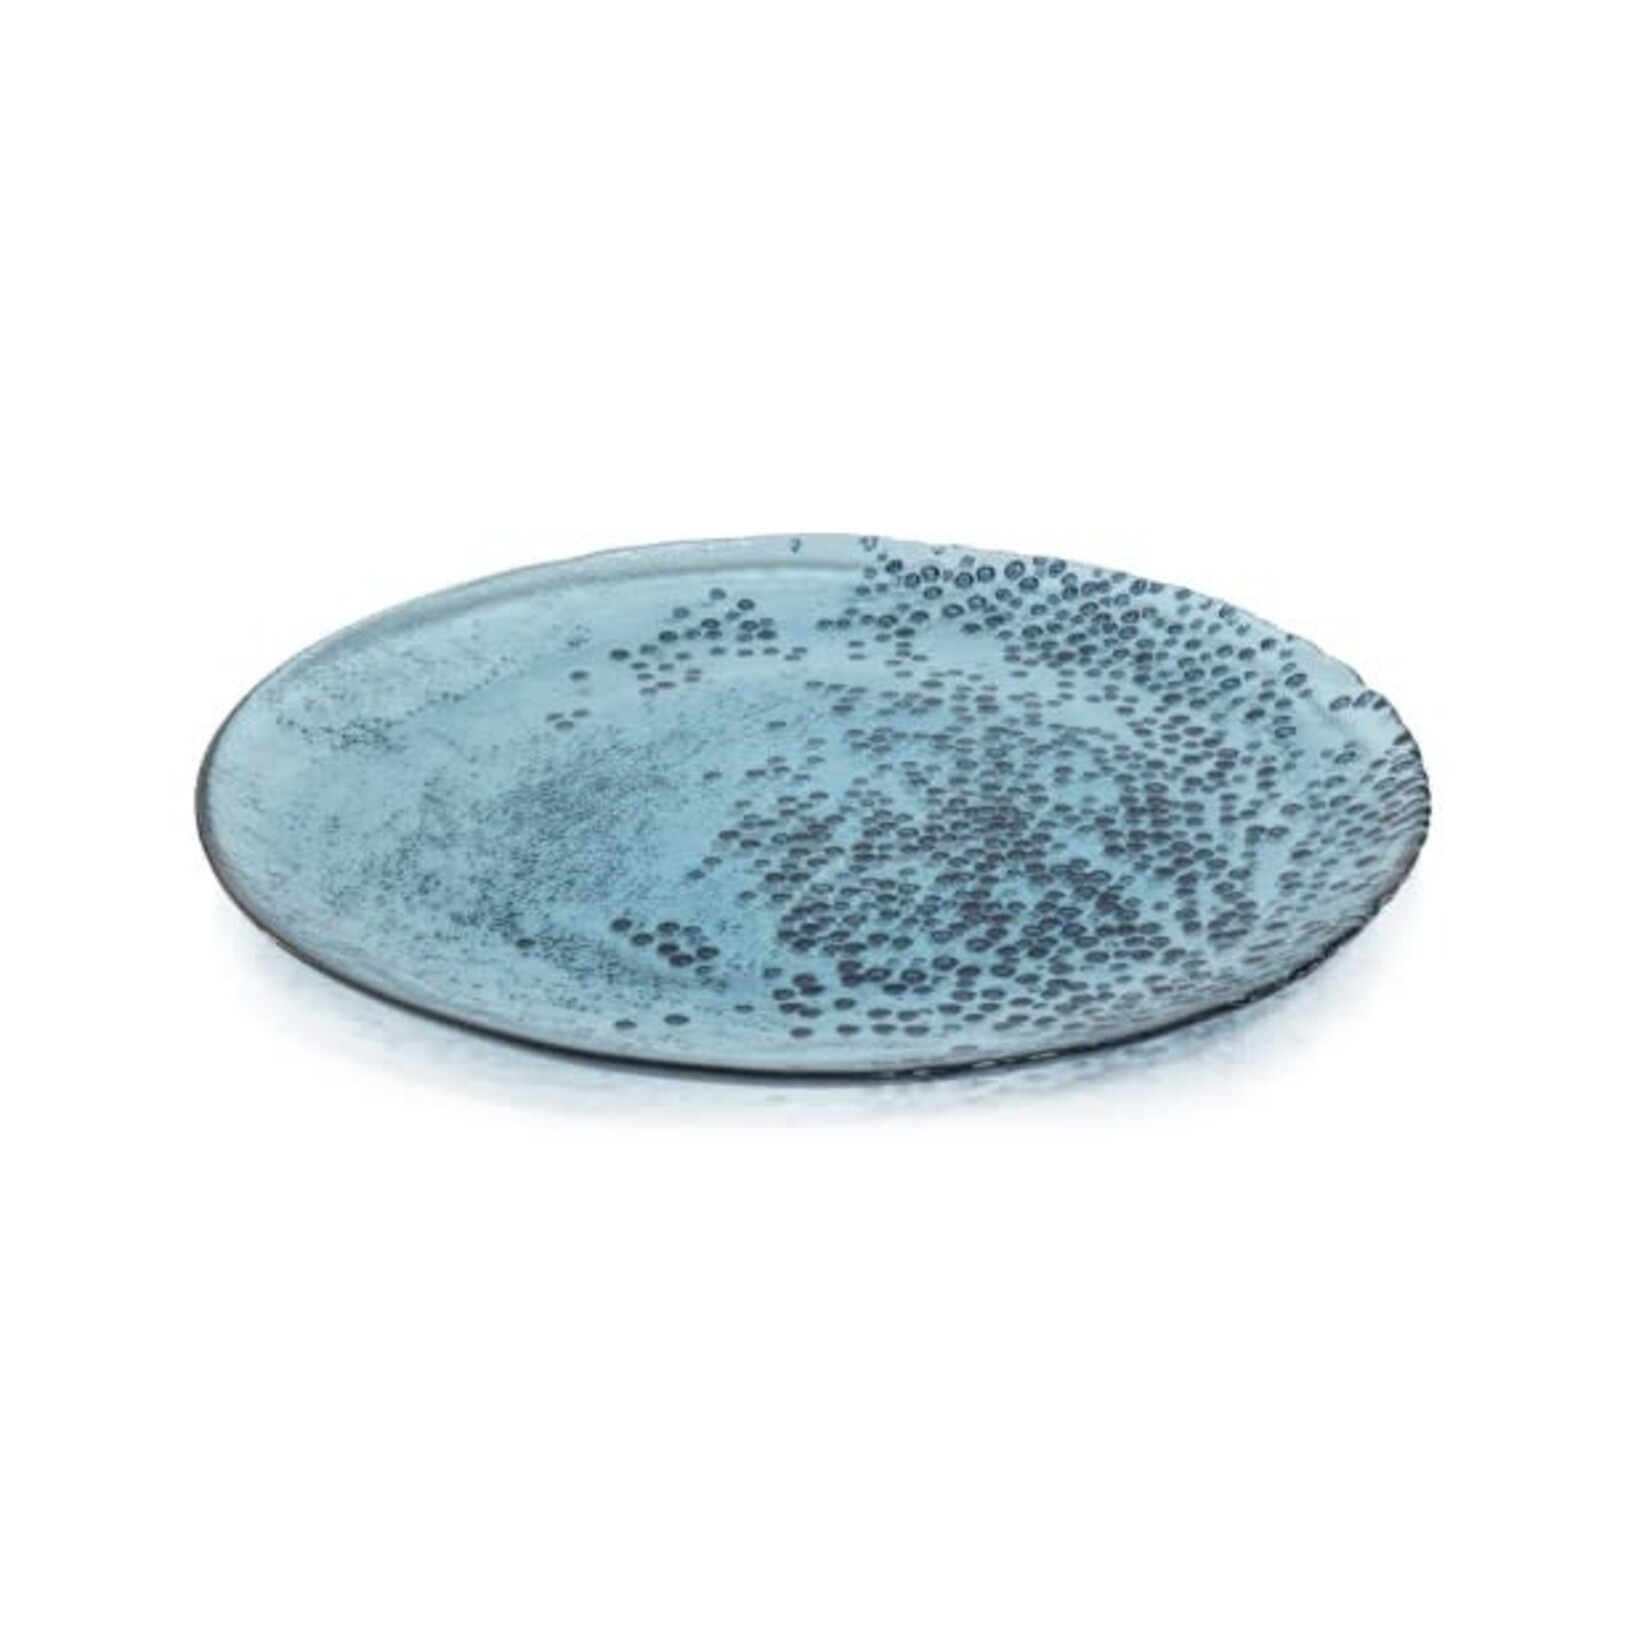 Zodax Dotted Glass Plate Blue 8.25 In